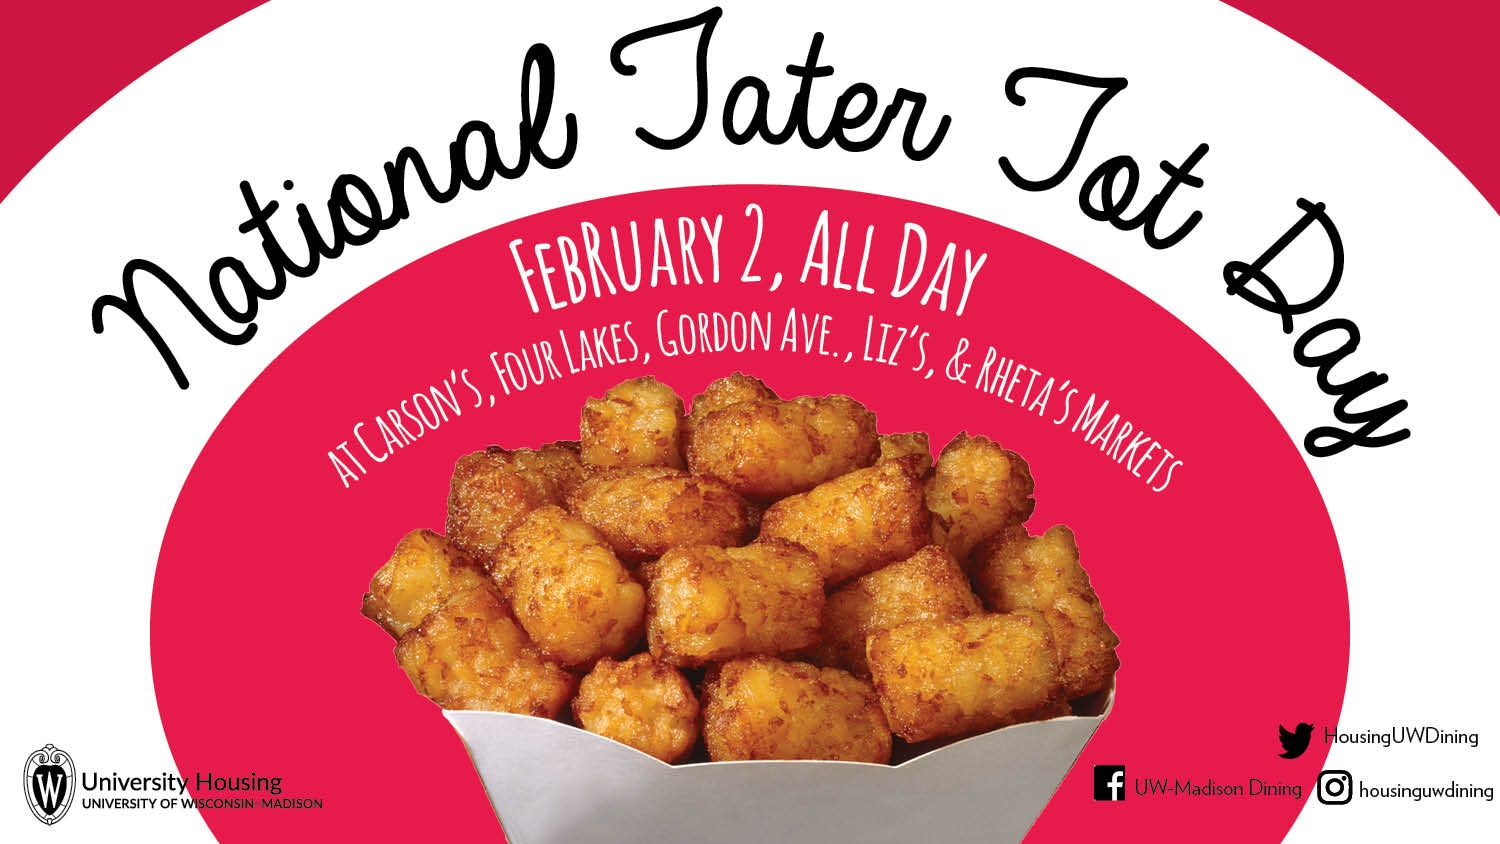 National Tater Day 2019 Qualads